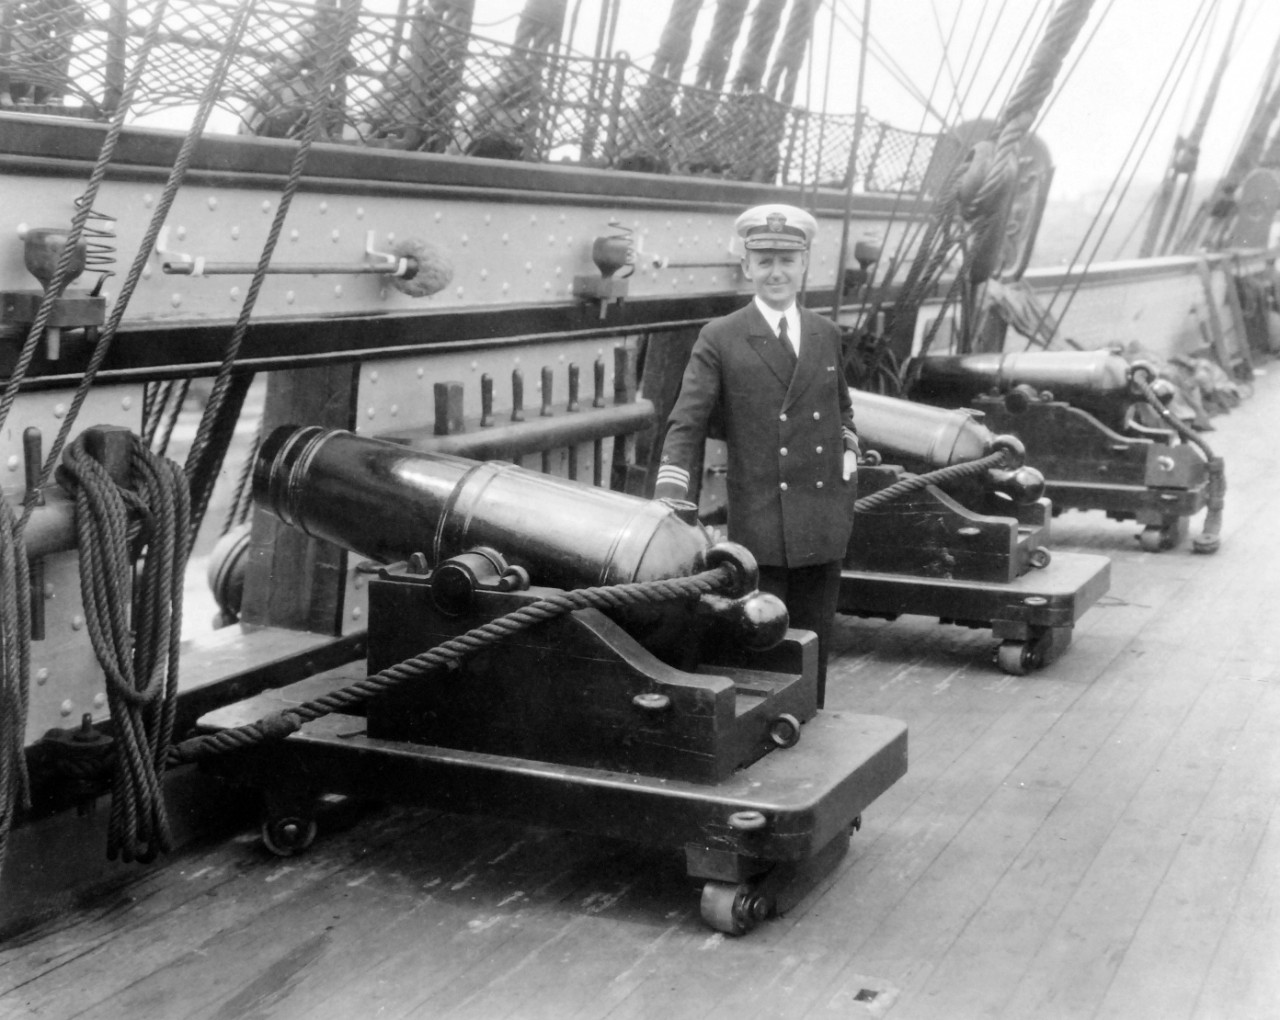 80-G-424995:  USS Constitution, 1931.  Commander Gulliver, Commanding Officer on first cruise of the frigate after restoration at Boston Navy Yard, Massachusetts, Photograph May 21, 1931.   Official U.S. Navy Photograph, now in the collections of the National Archives.   (2017/08/01).  